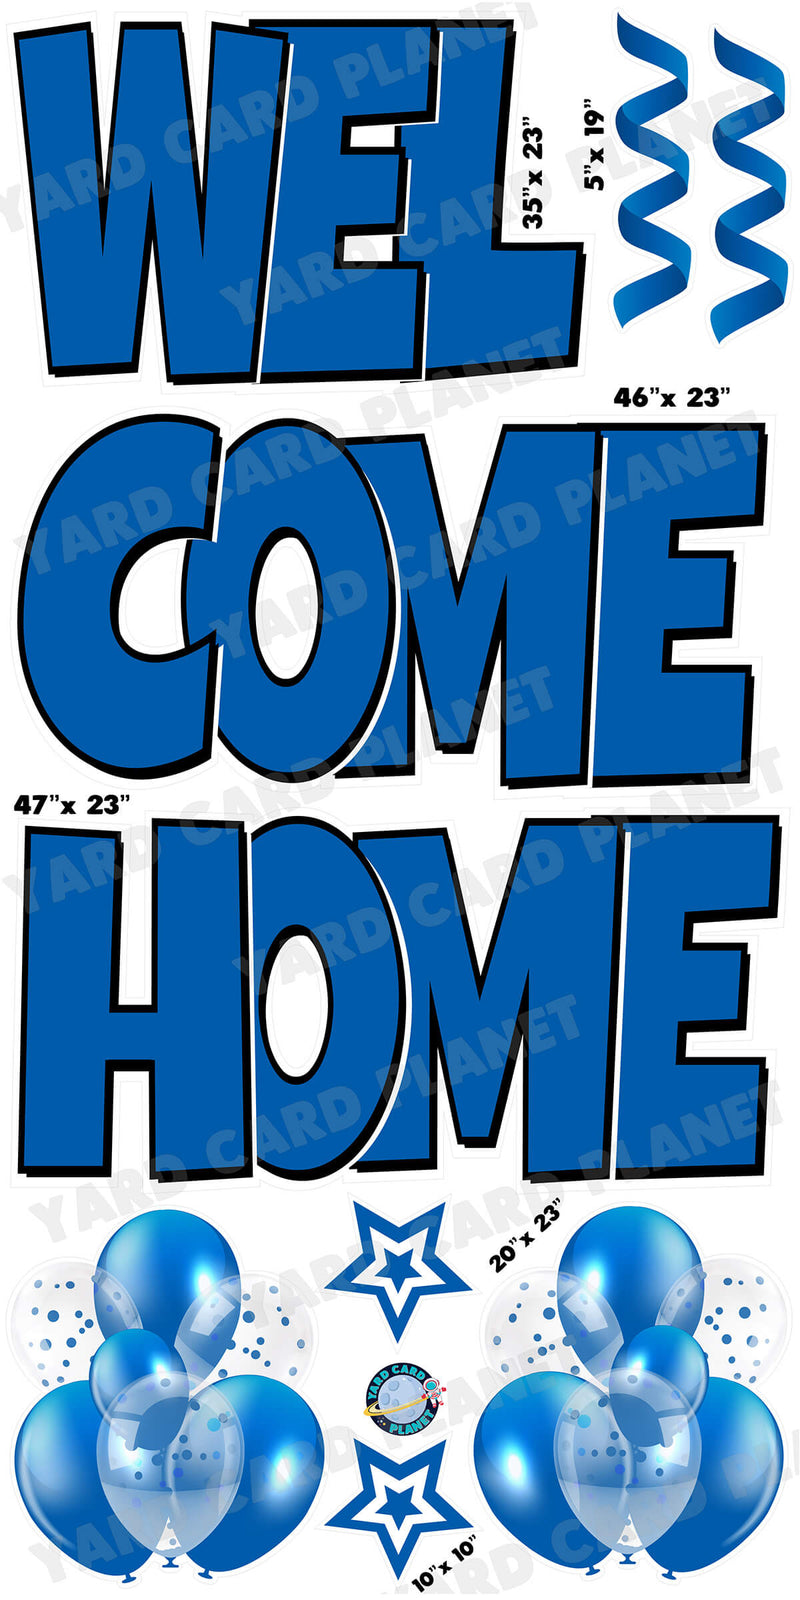 Large 23" Welcome Home Yard Card EZ Quick Sets in Luckiest Guy Font and Flair in Blue Solid Color